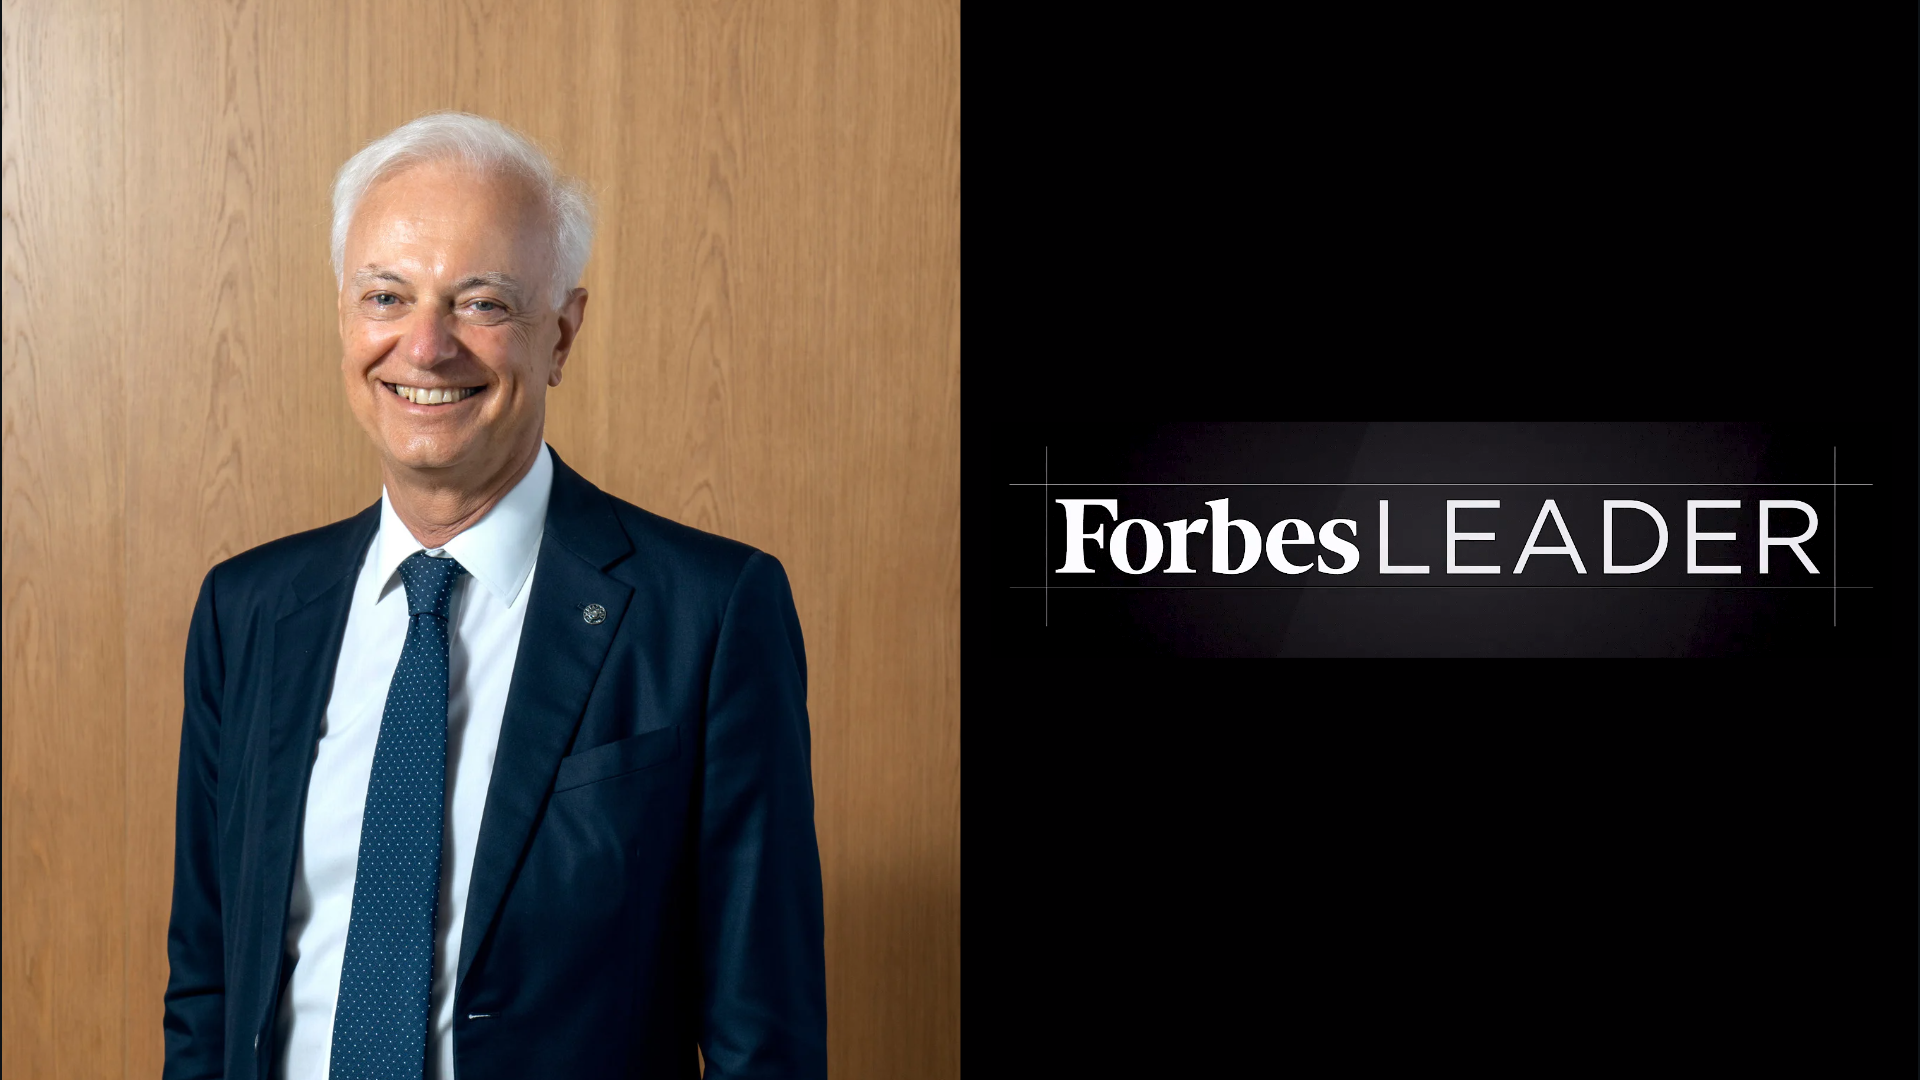 FORBES LEADER interview with Paolo Bertazzoni - Bertazzoni